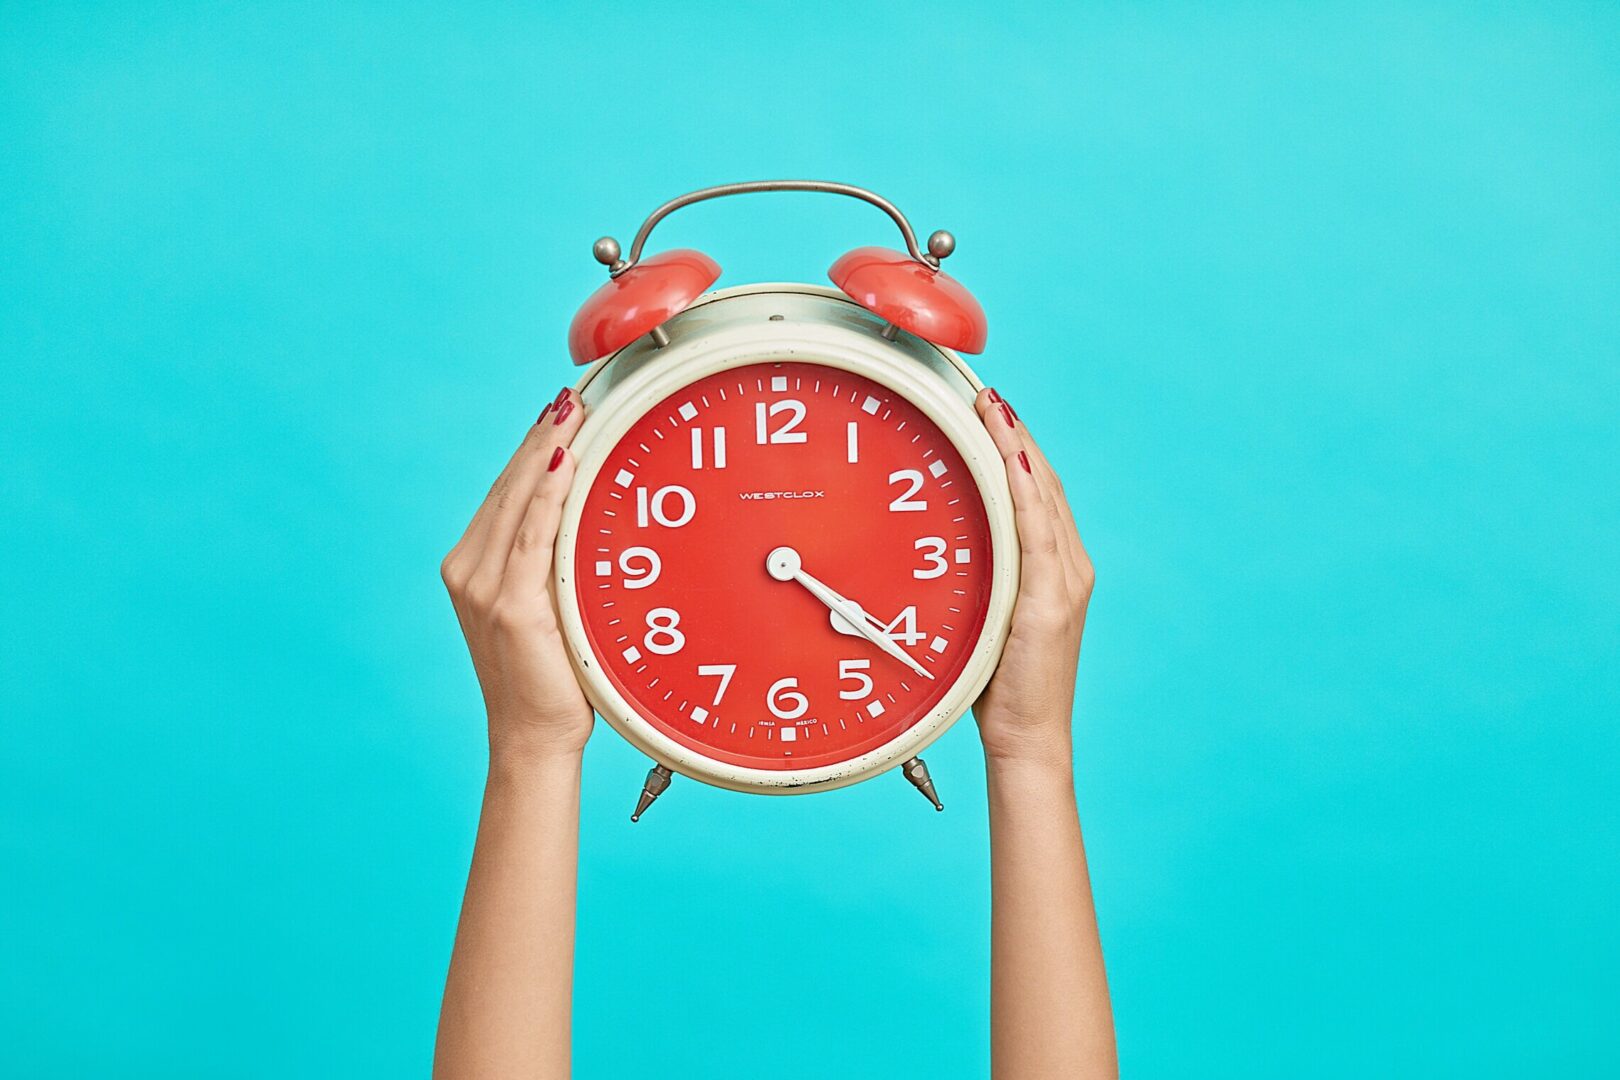 A woman's hands are holding up an alarm clock on a blue background.